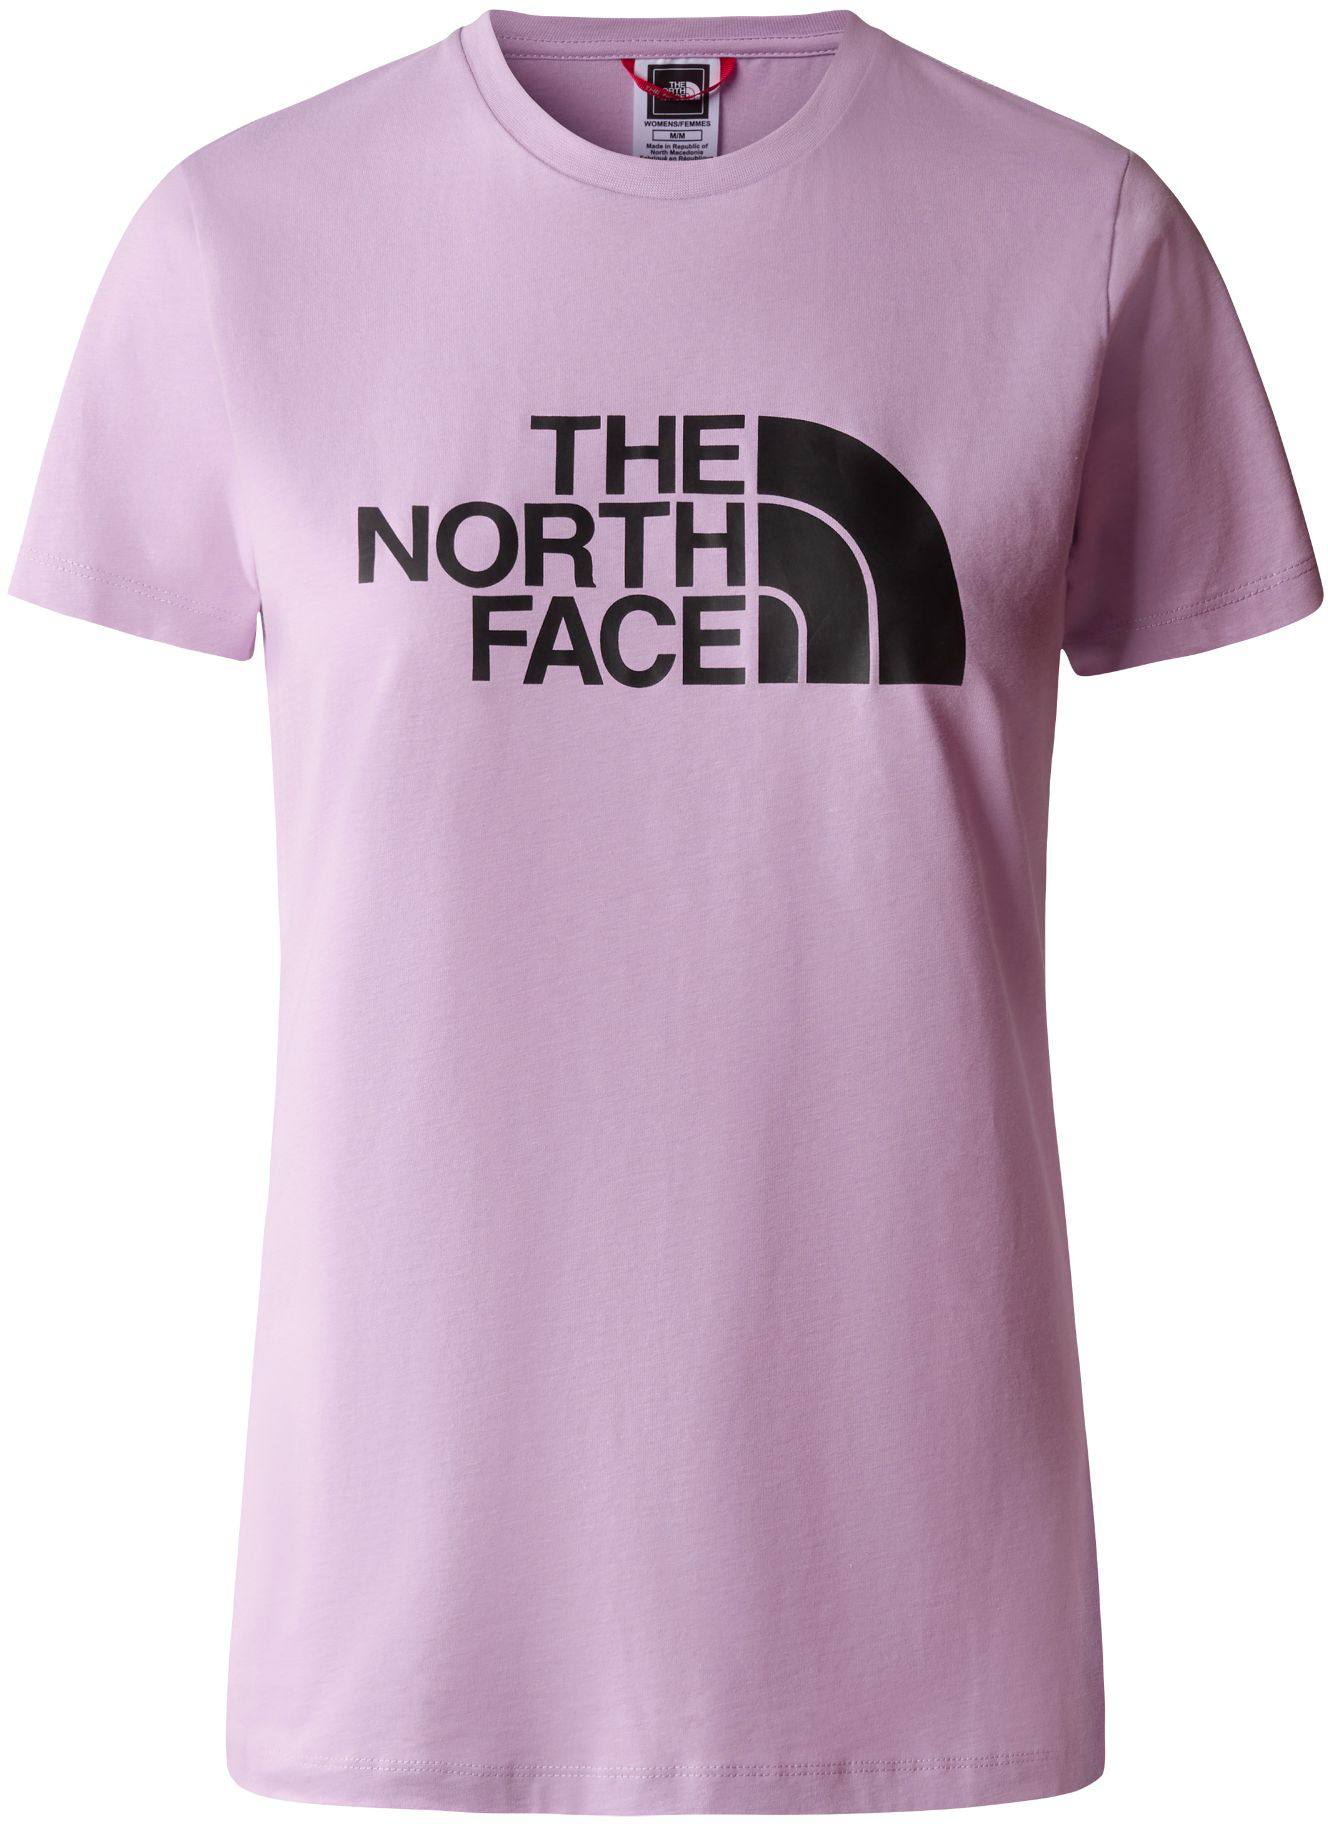 The North Face Easy W Tee SS Lupin(E) XL